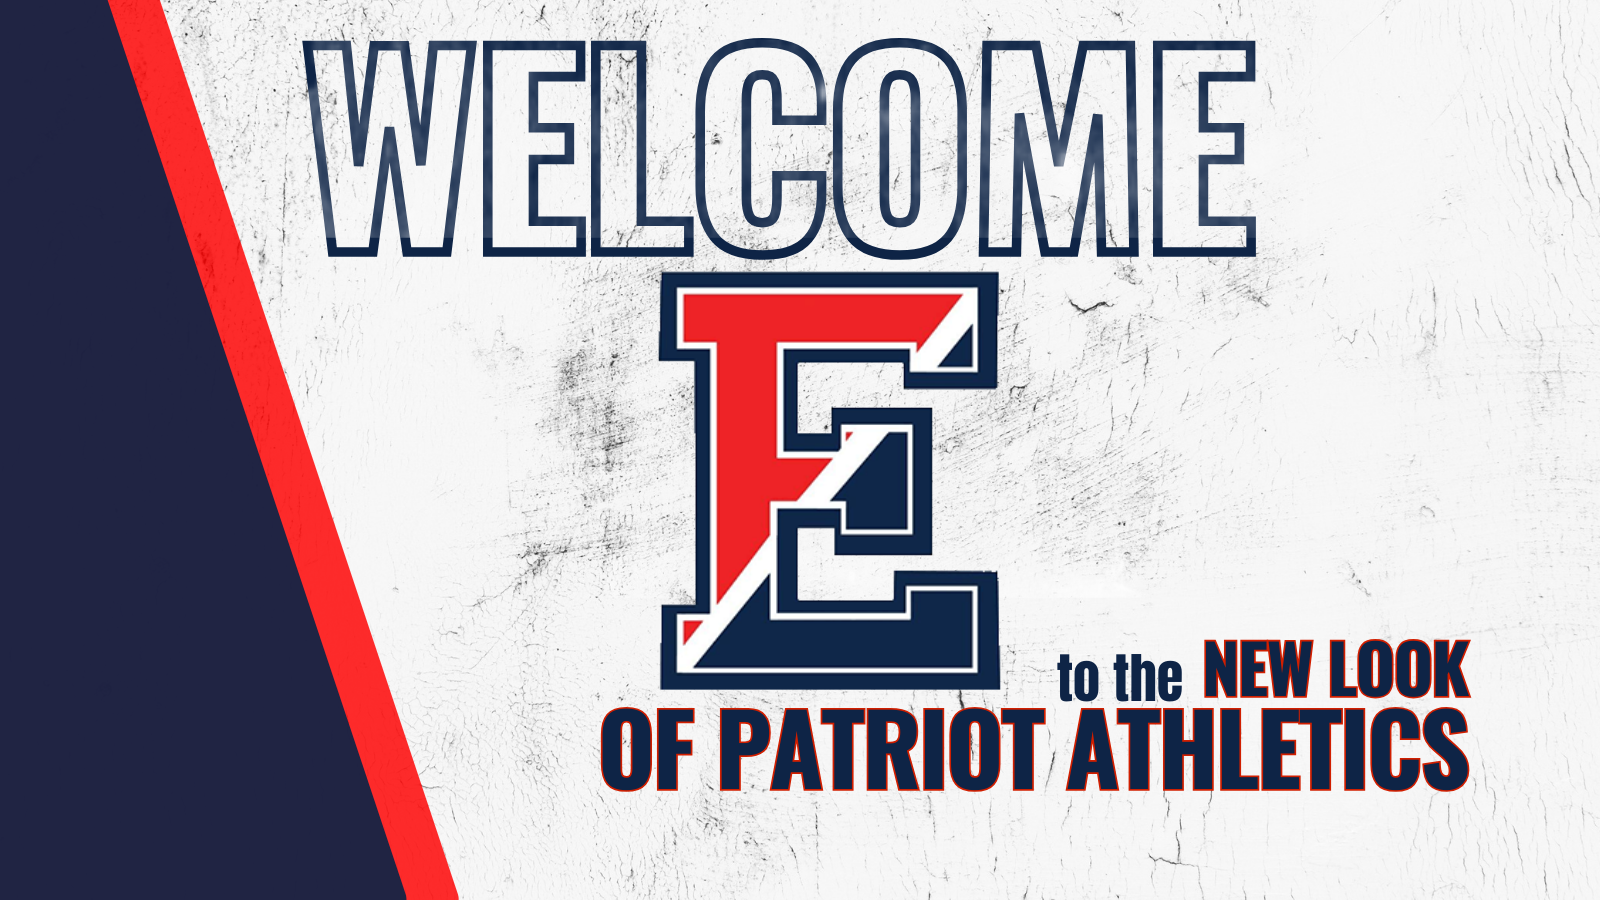 1709930599_CopyofOleyValleyWelcometo1280x320pxTwitterPost9.png - Image for 🎉 Exciting News for Patriot Athletics Fans! 🎉